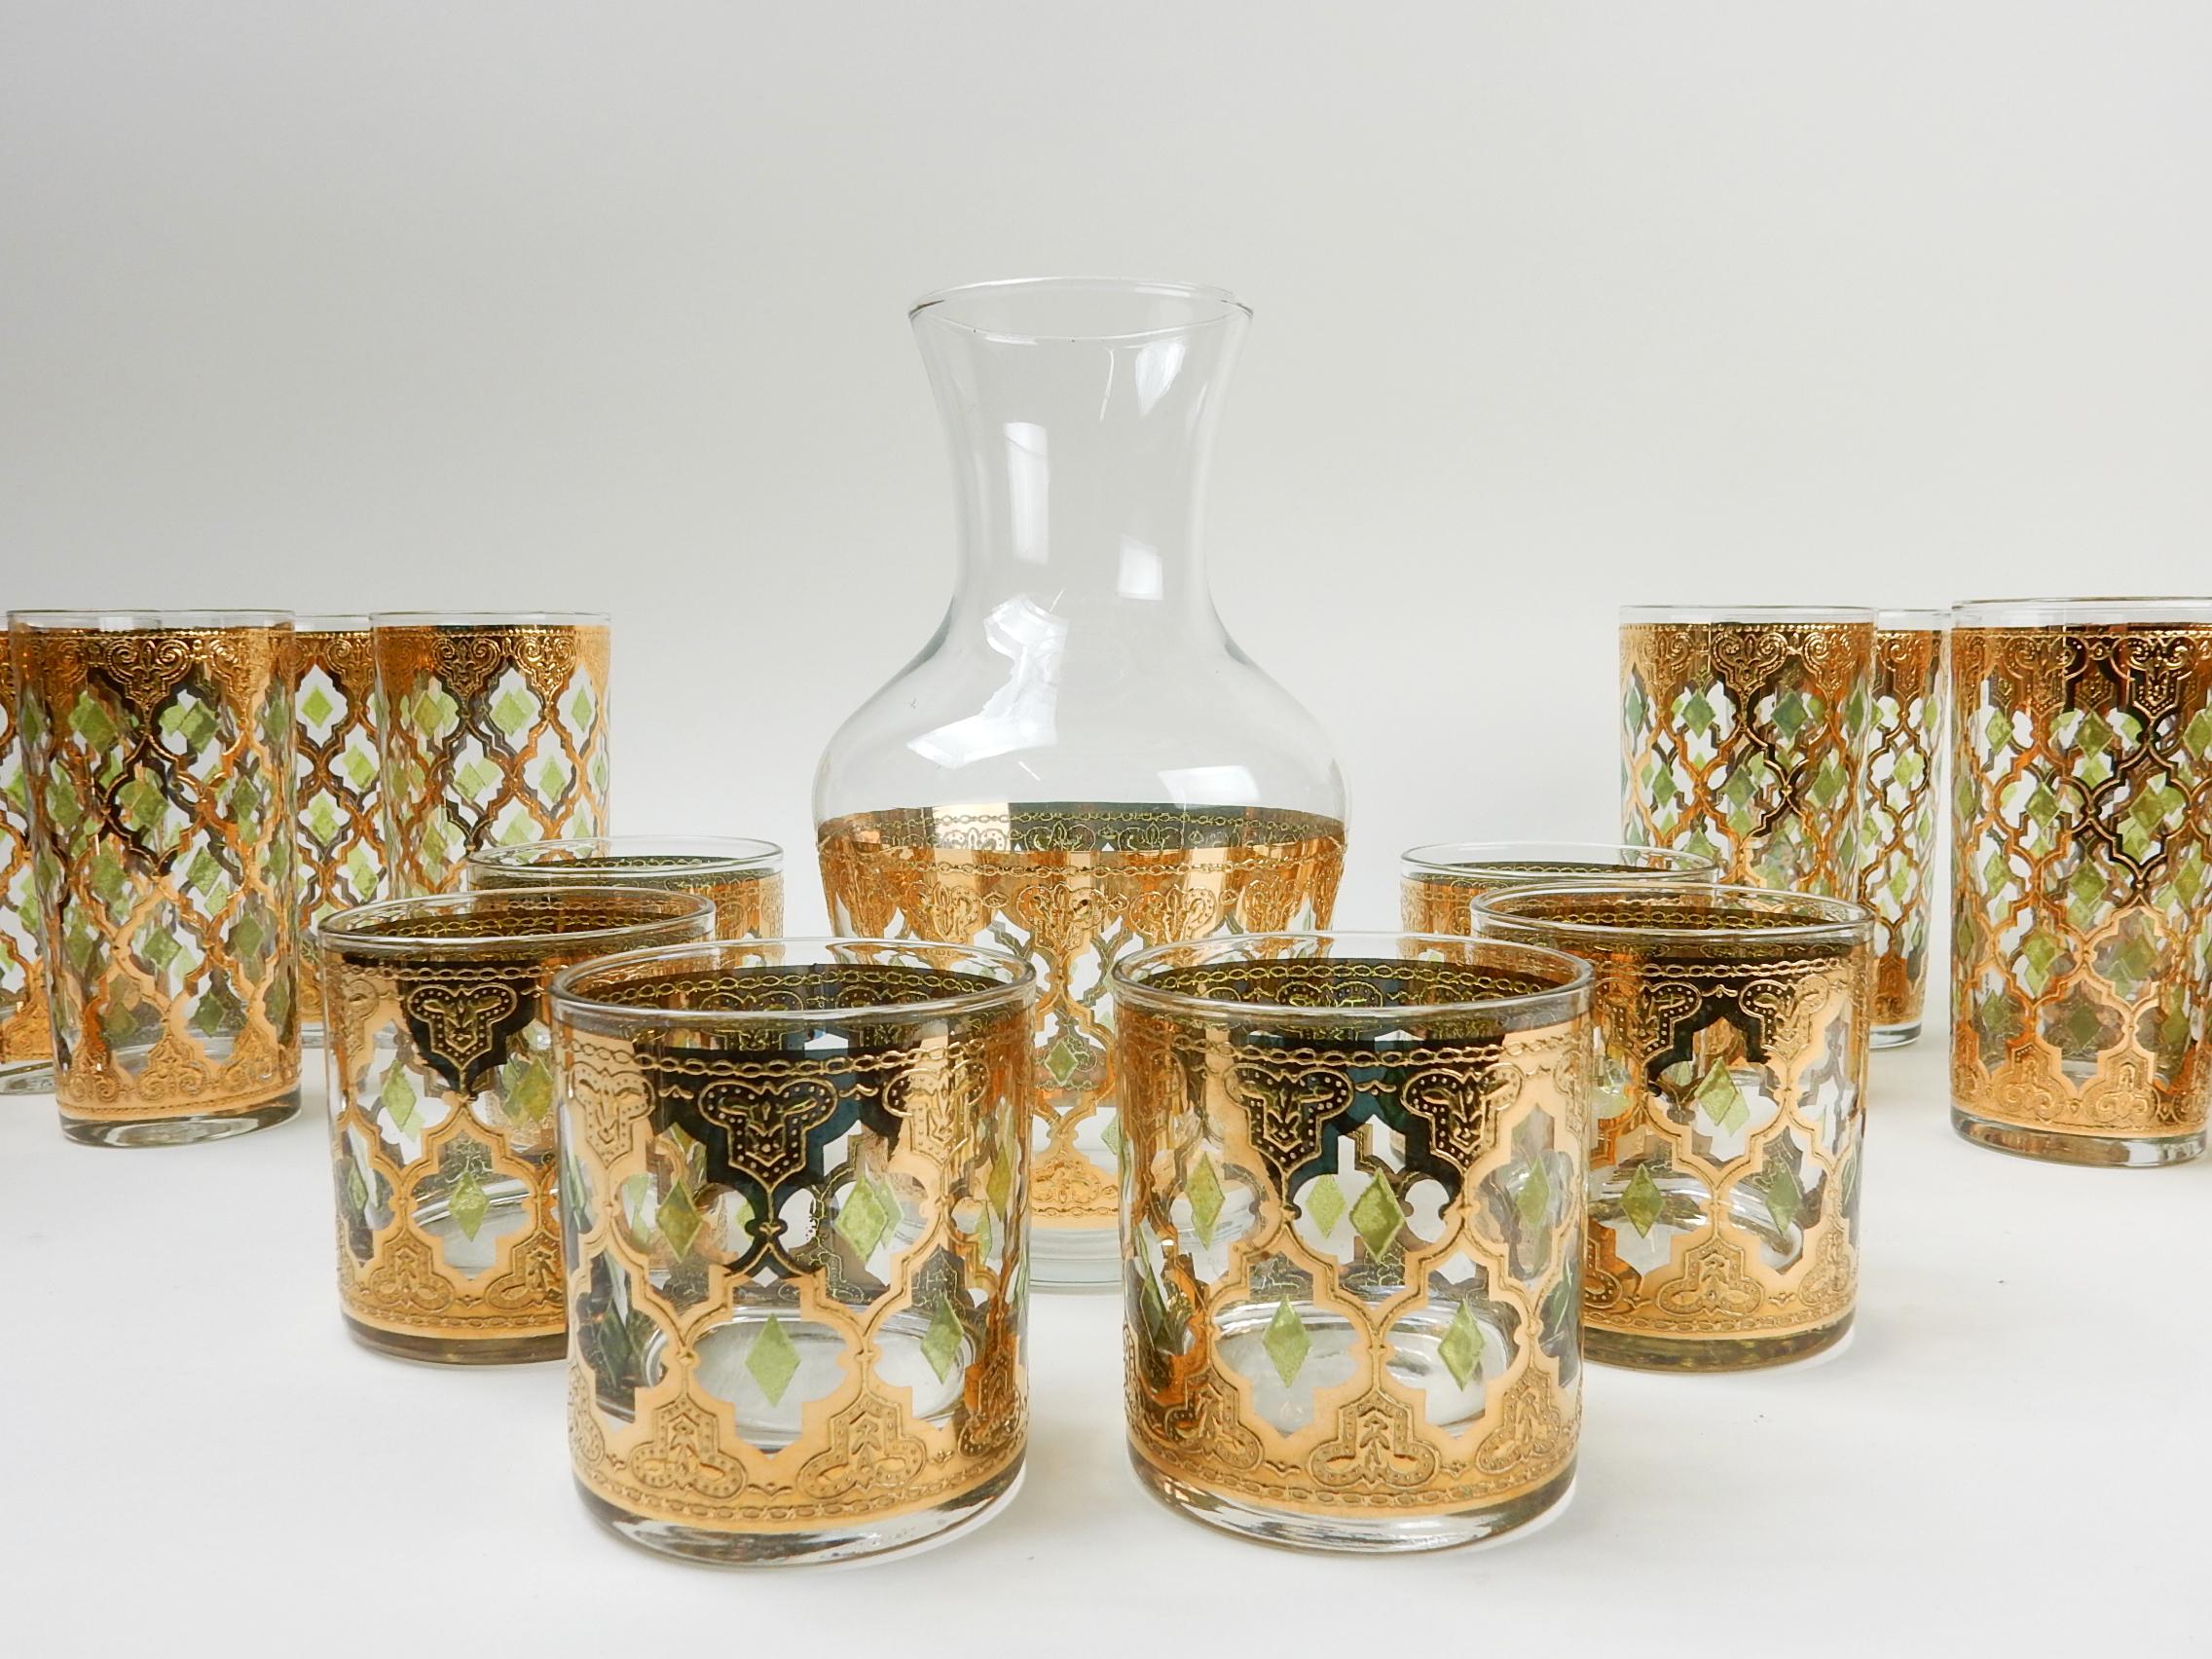 Fabulous set of Culver Ltd ~Valencia~ 22-karat. Gold with emerald diamonds
bar glasses.
Included is a set of 12 hi-ball glasses, 6 rocks glasses and decanter.
All are in excellent condition showing little to no wear.
 